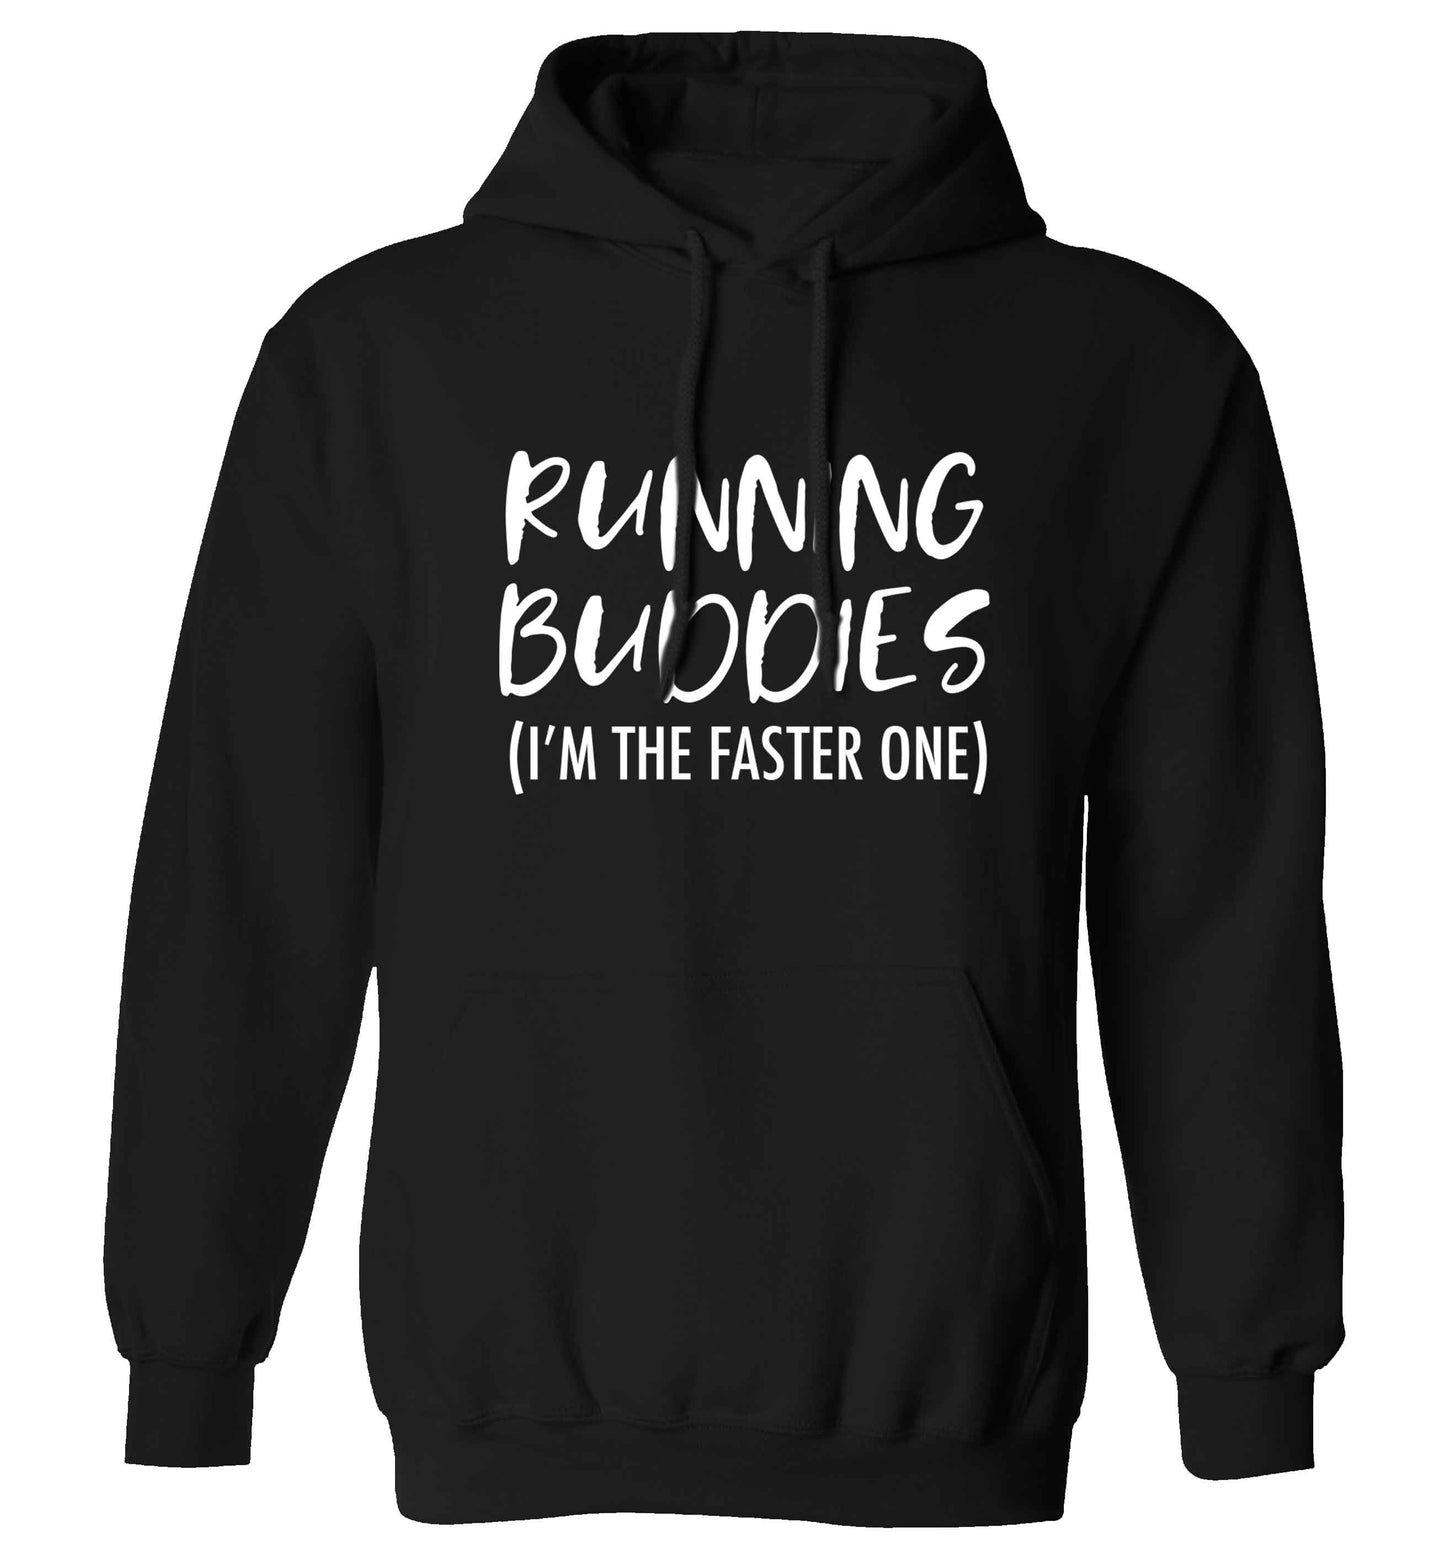 Running buddies (I'm the faster one) adults unisex black hoodie 2XL